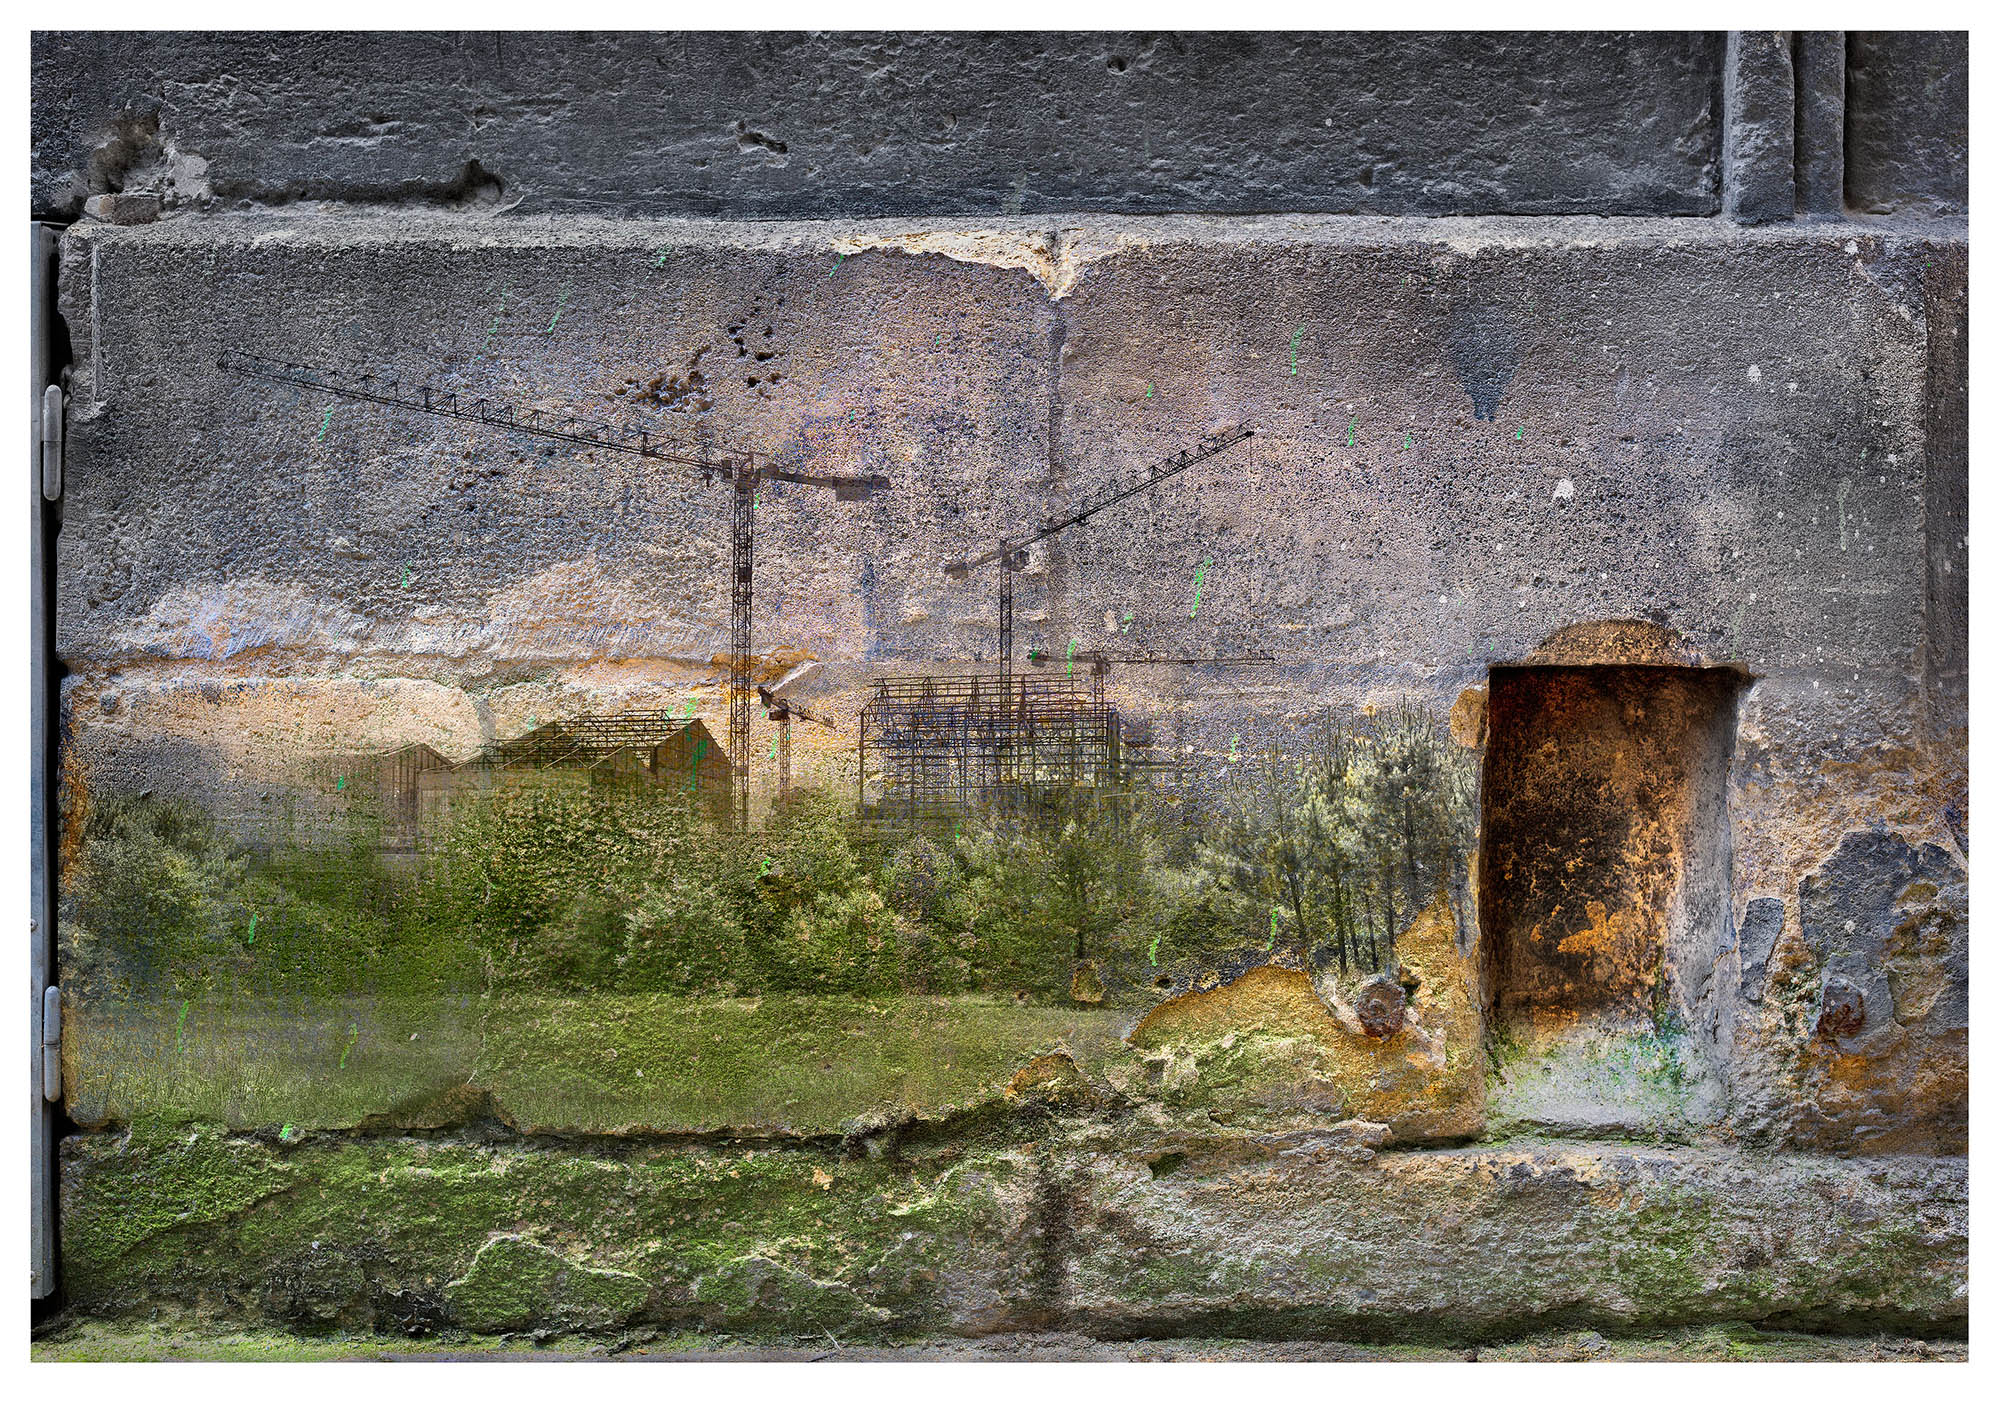 Composite photograph of weathered wall with some white building product netting stuck to it. At the bottom of the picture left is a small pile of burning dumped rubbish while to the right a fox looks on. The top of the picture shows a copse of trees and telegraph poles suggesting an urban setting